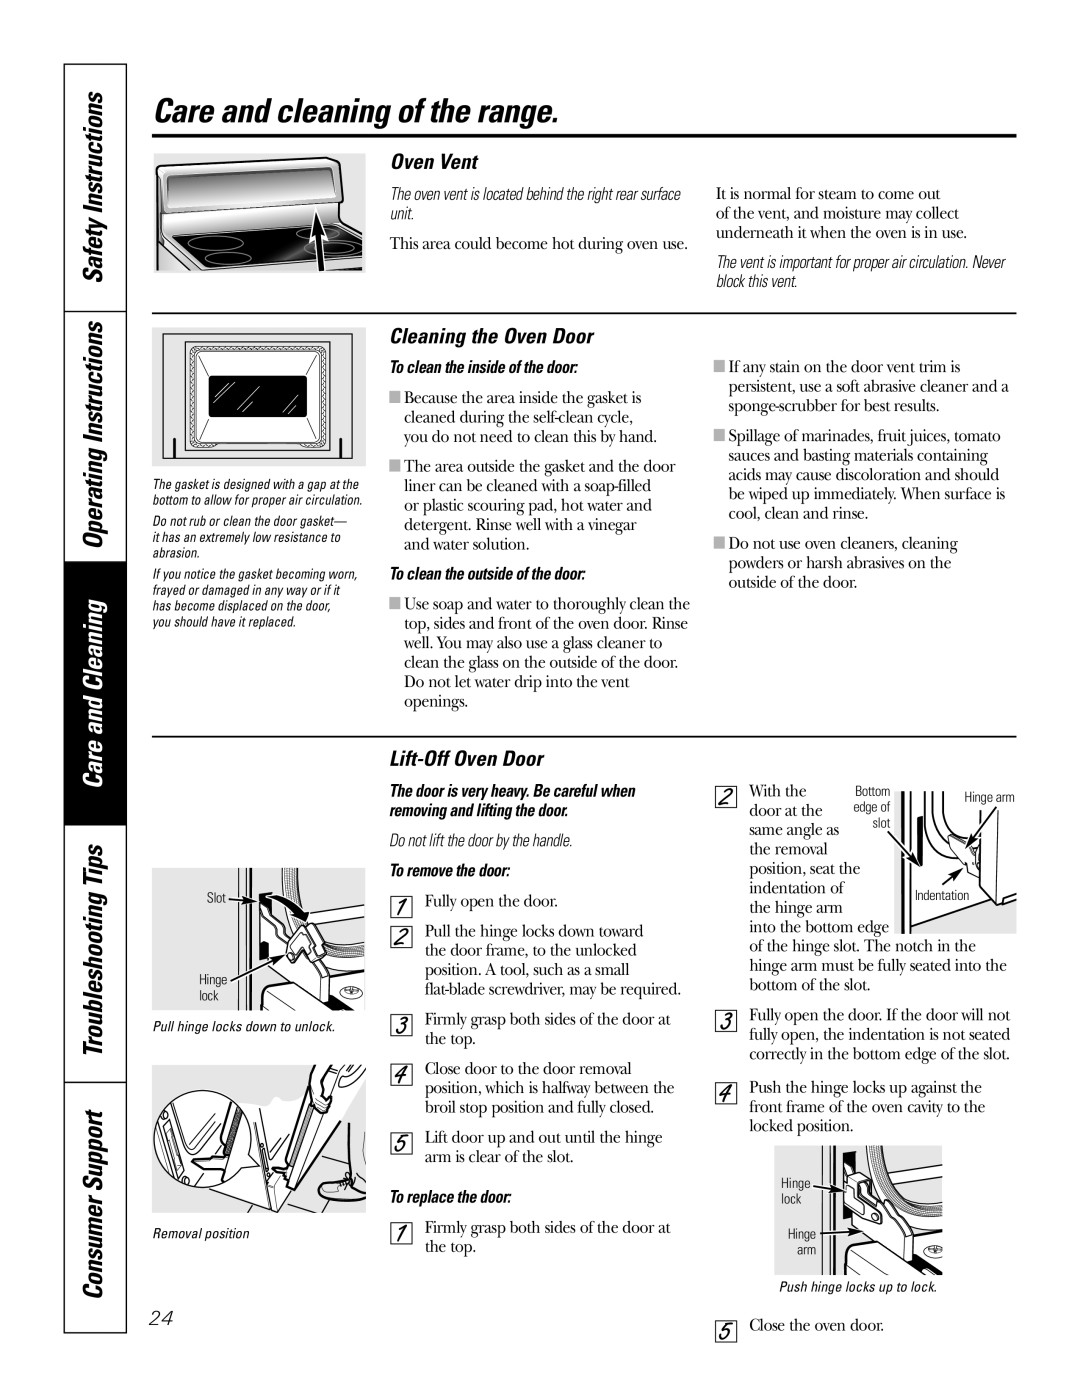 GE EER4001 and Cleaning Operating Instructions, Consumer Support Troubleshooting Tips Care, Oven Vent, Lift-Off Oven Door 